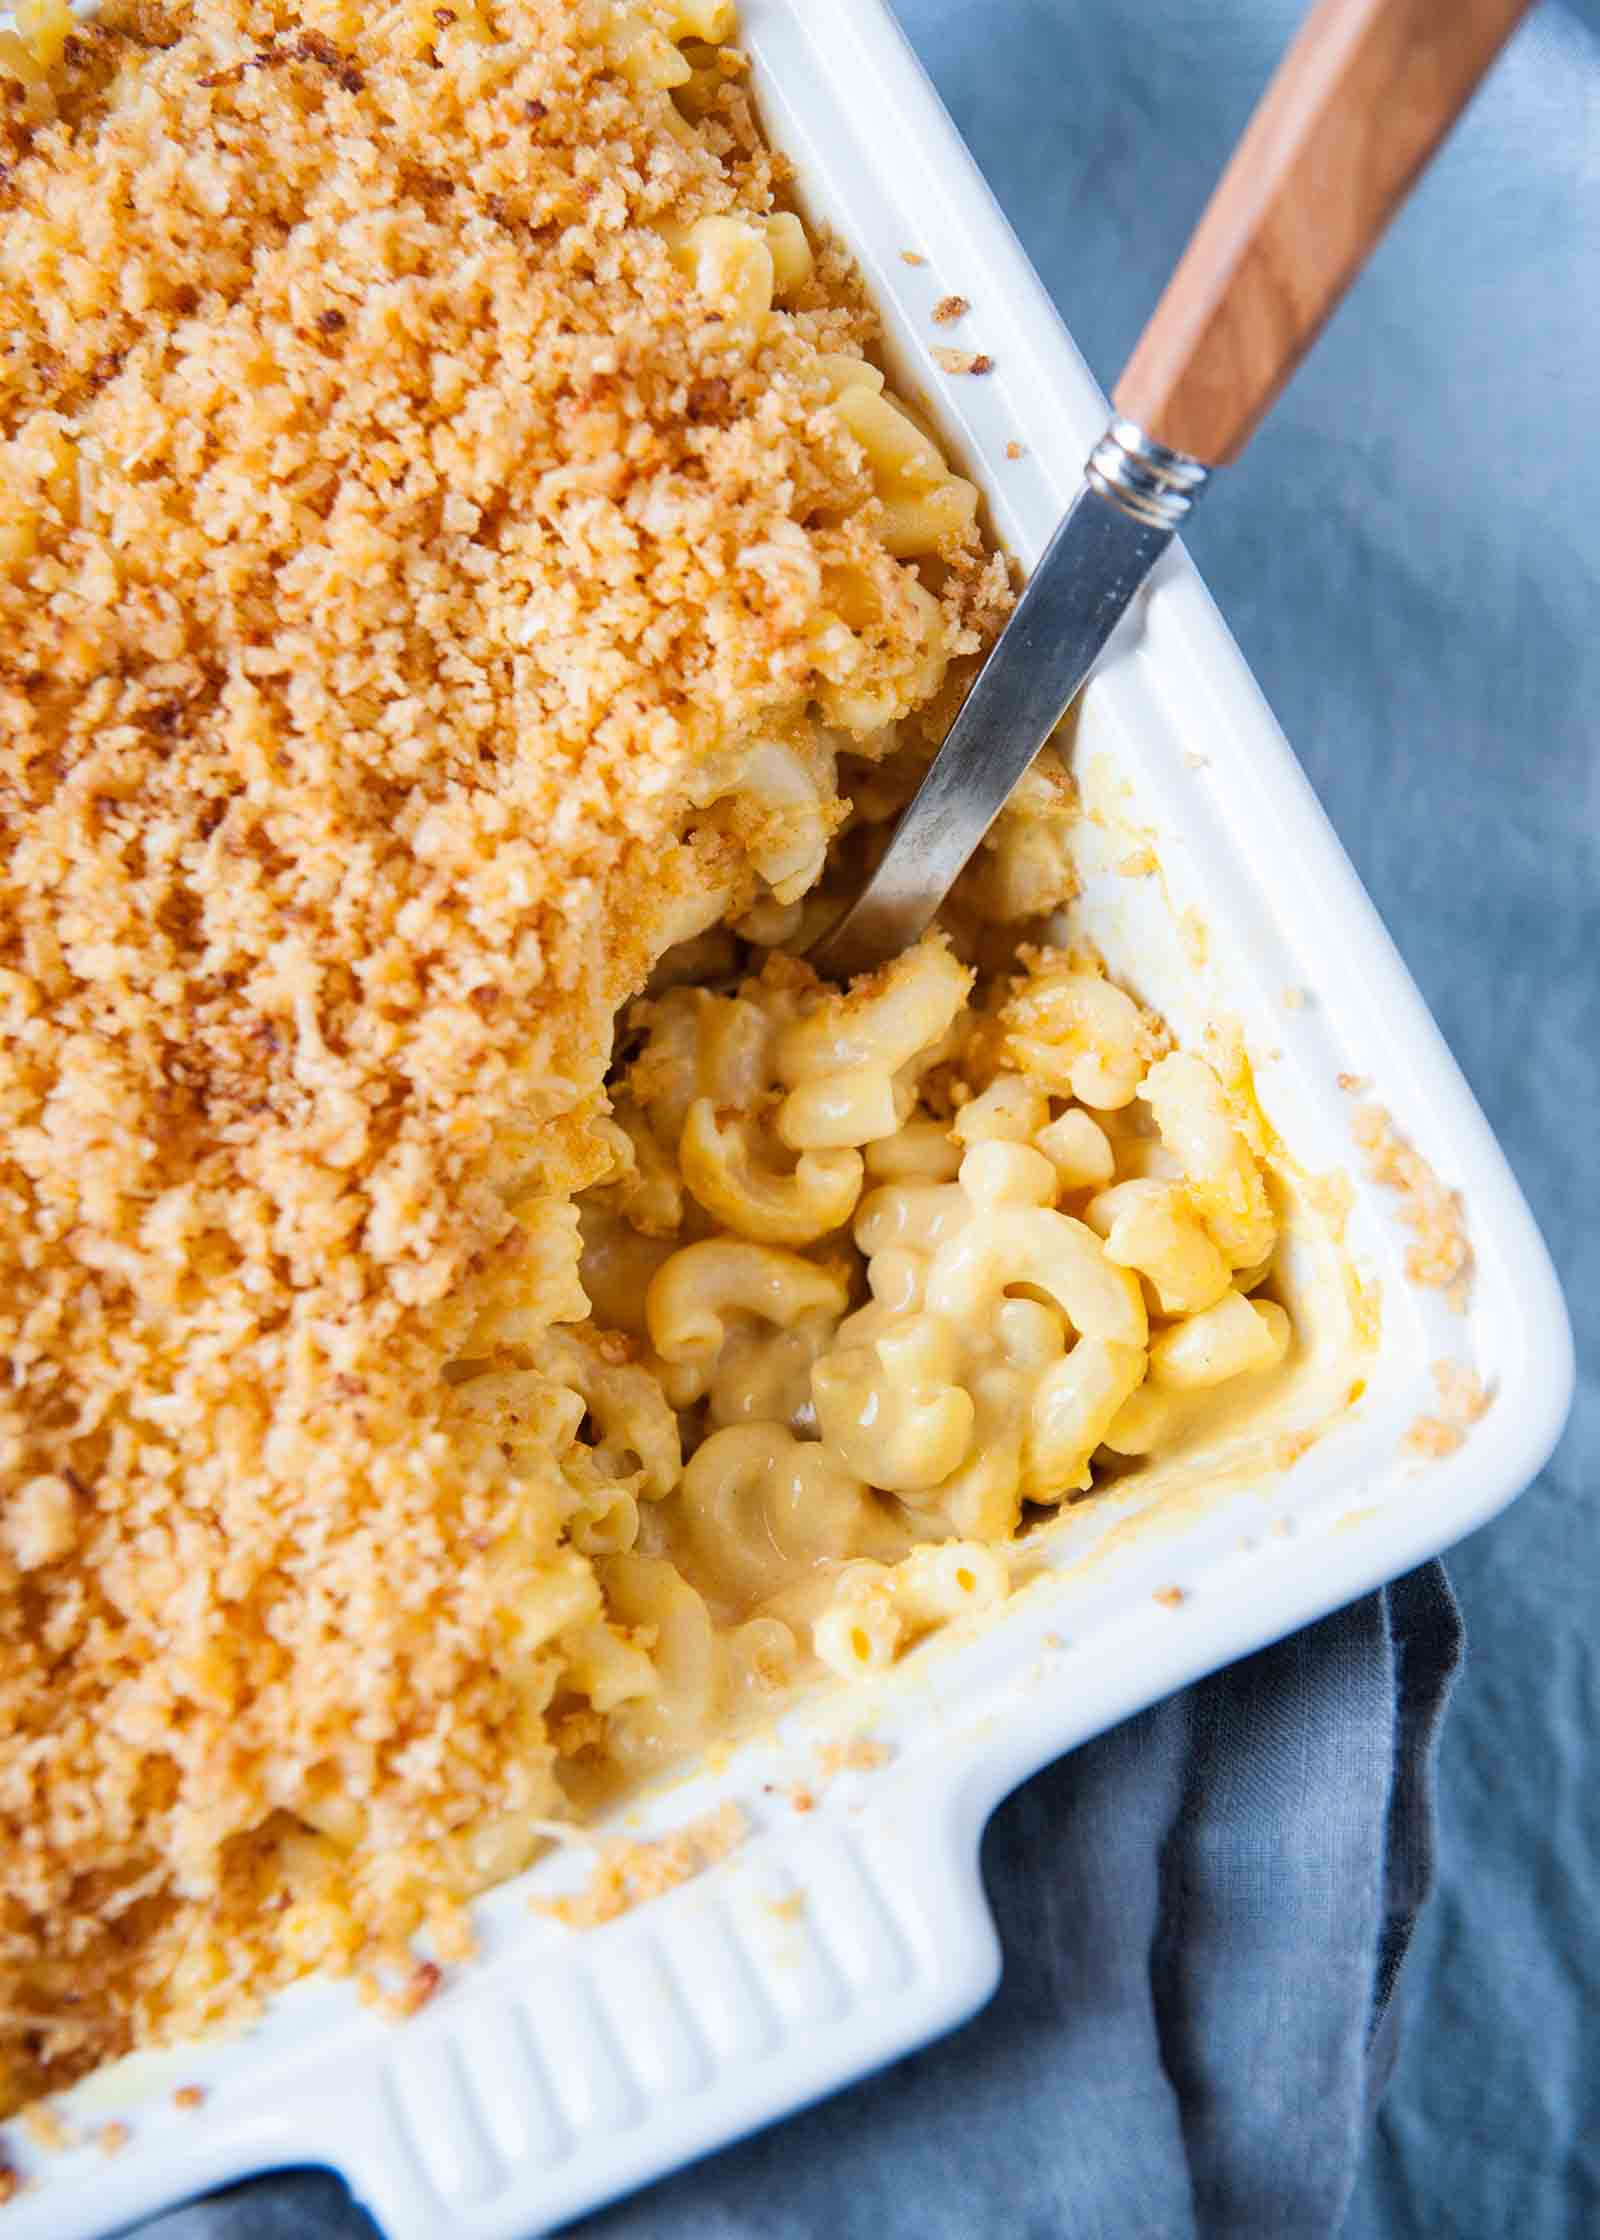 Easy Macaroni And Cheese Baked Recipe
 Creamy Baked Mac and Cheese Recipe